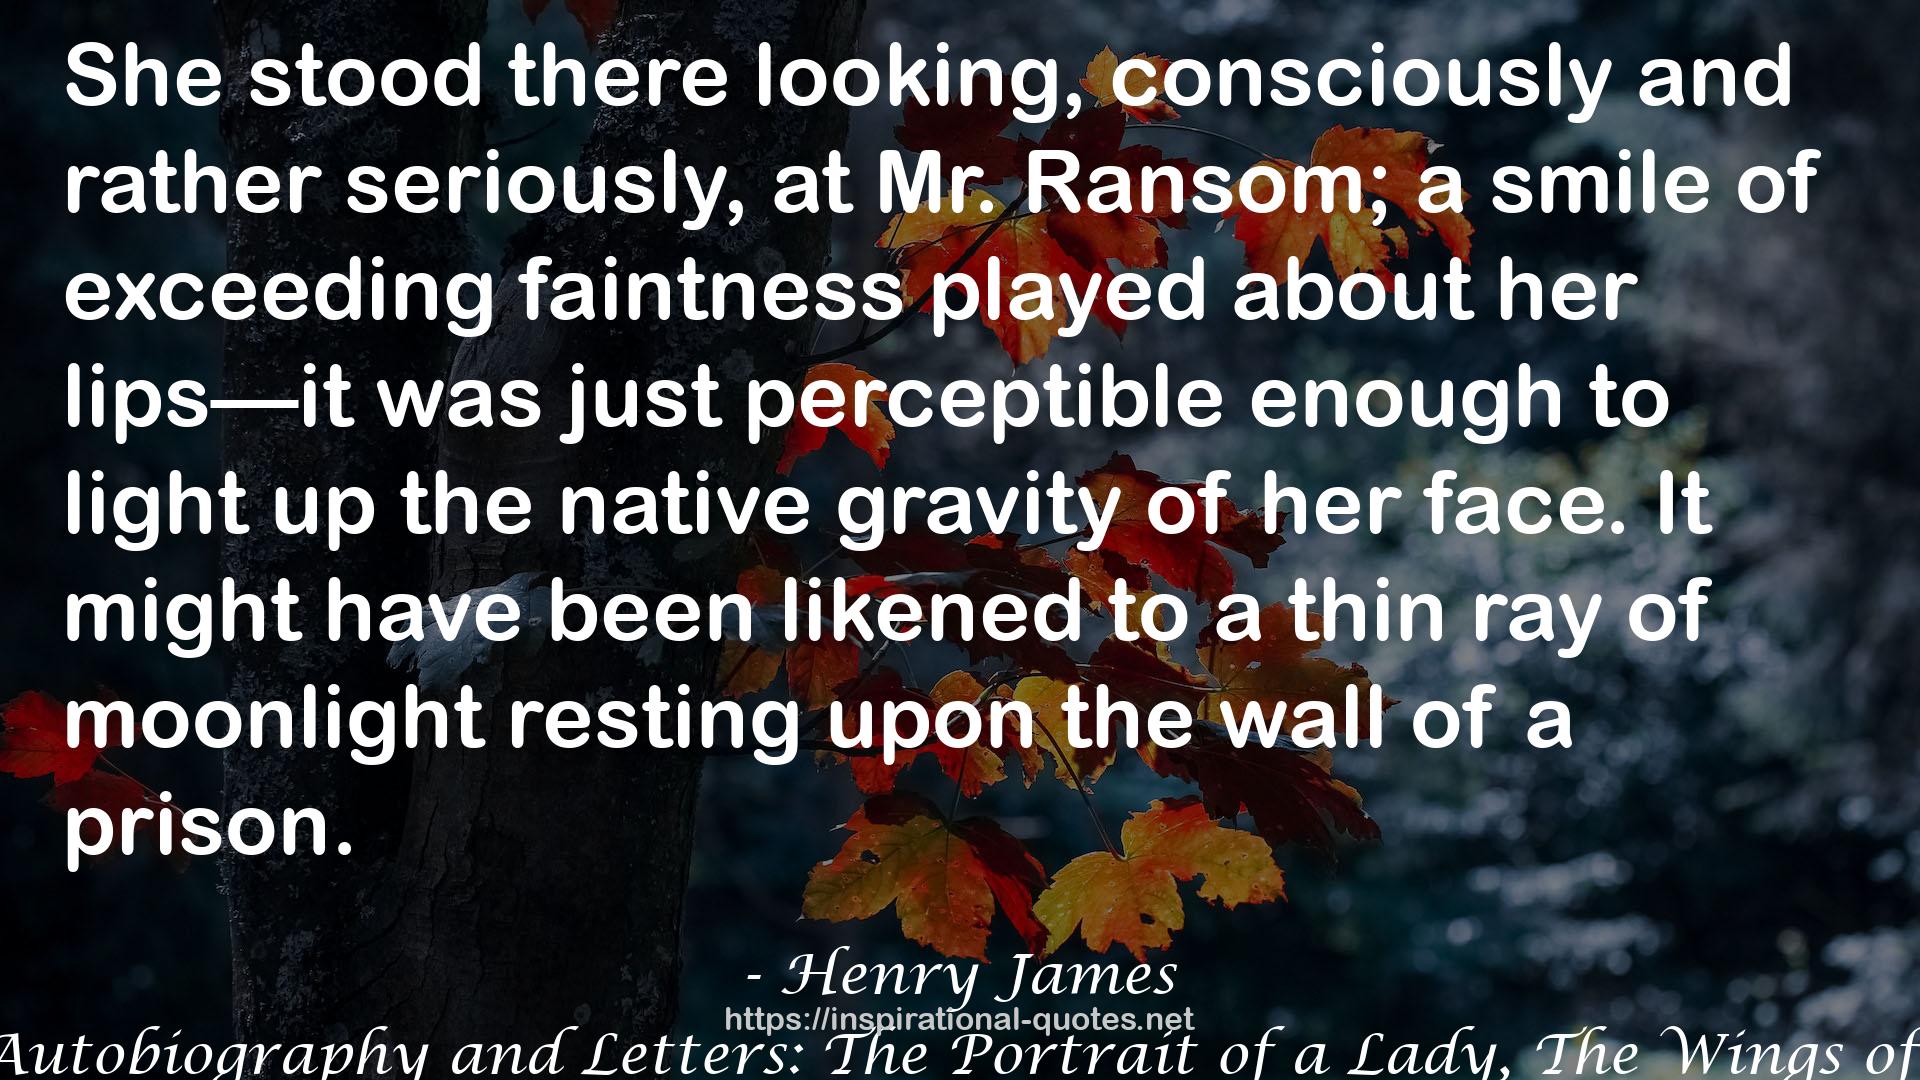 Complete Works of Henry James: Novels, Short Stories, Plays, Essays, Autobiography and Letters: The Portrait of a Lady, The Wings of the Dove, The American, ... Knew, Washington Square, Daisy Miller… QUOTES